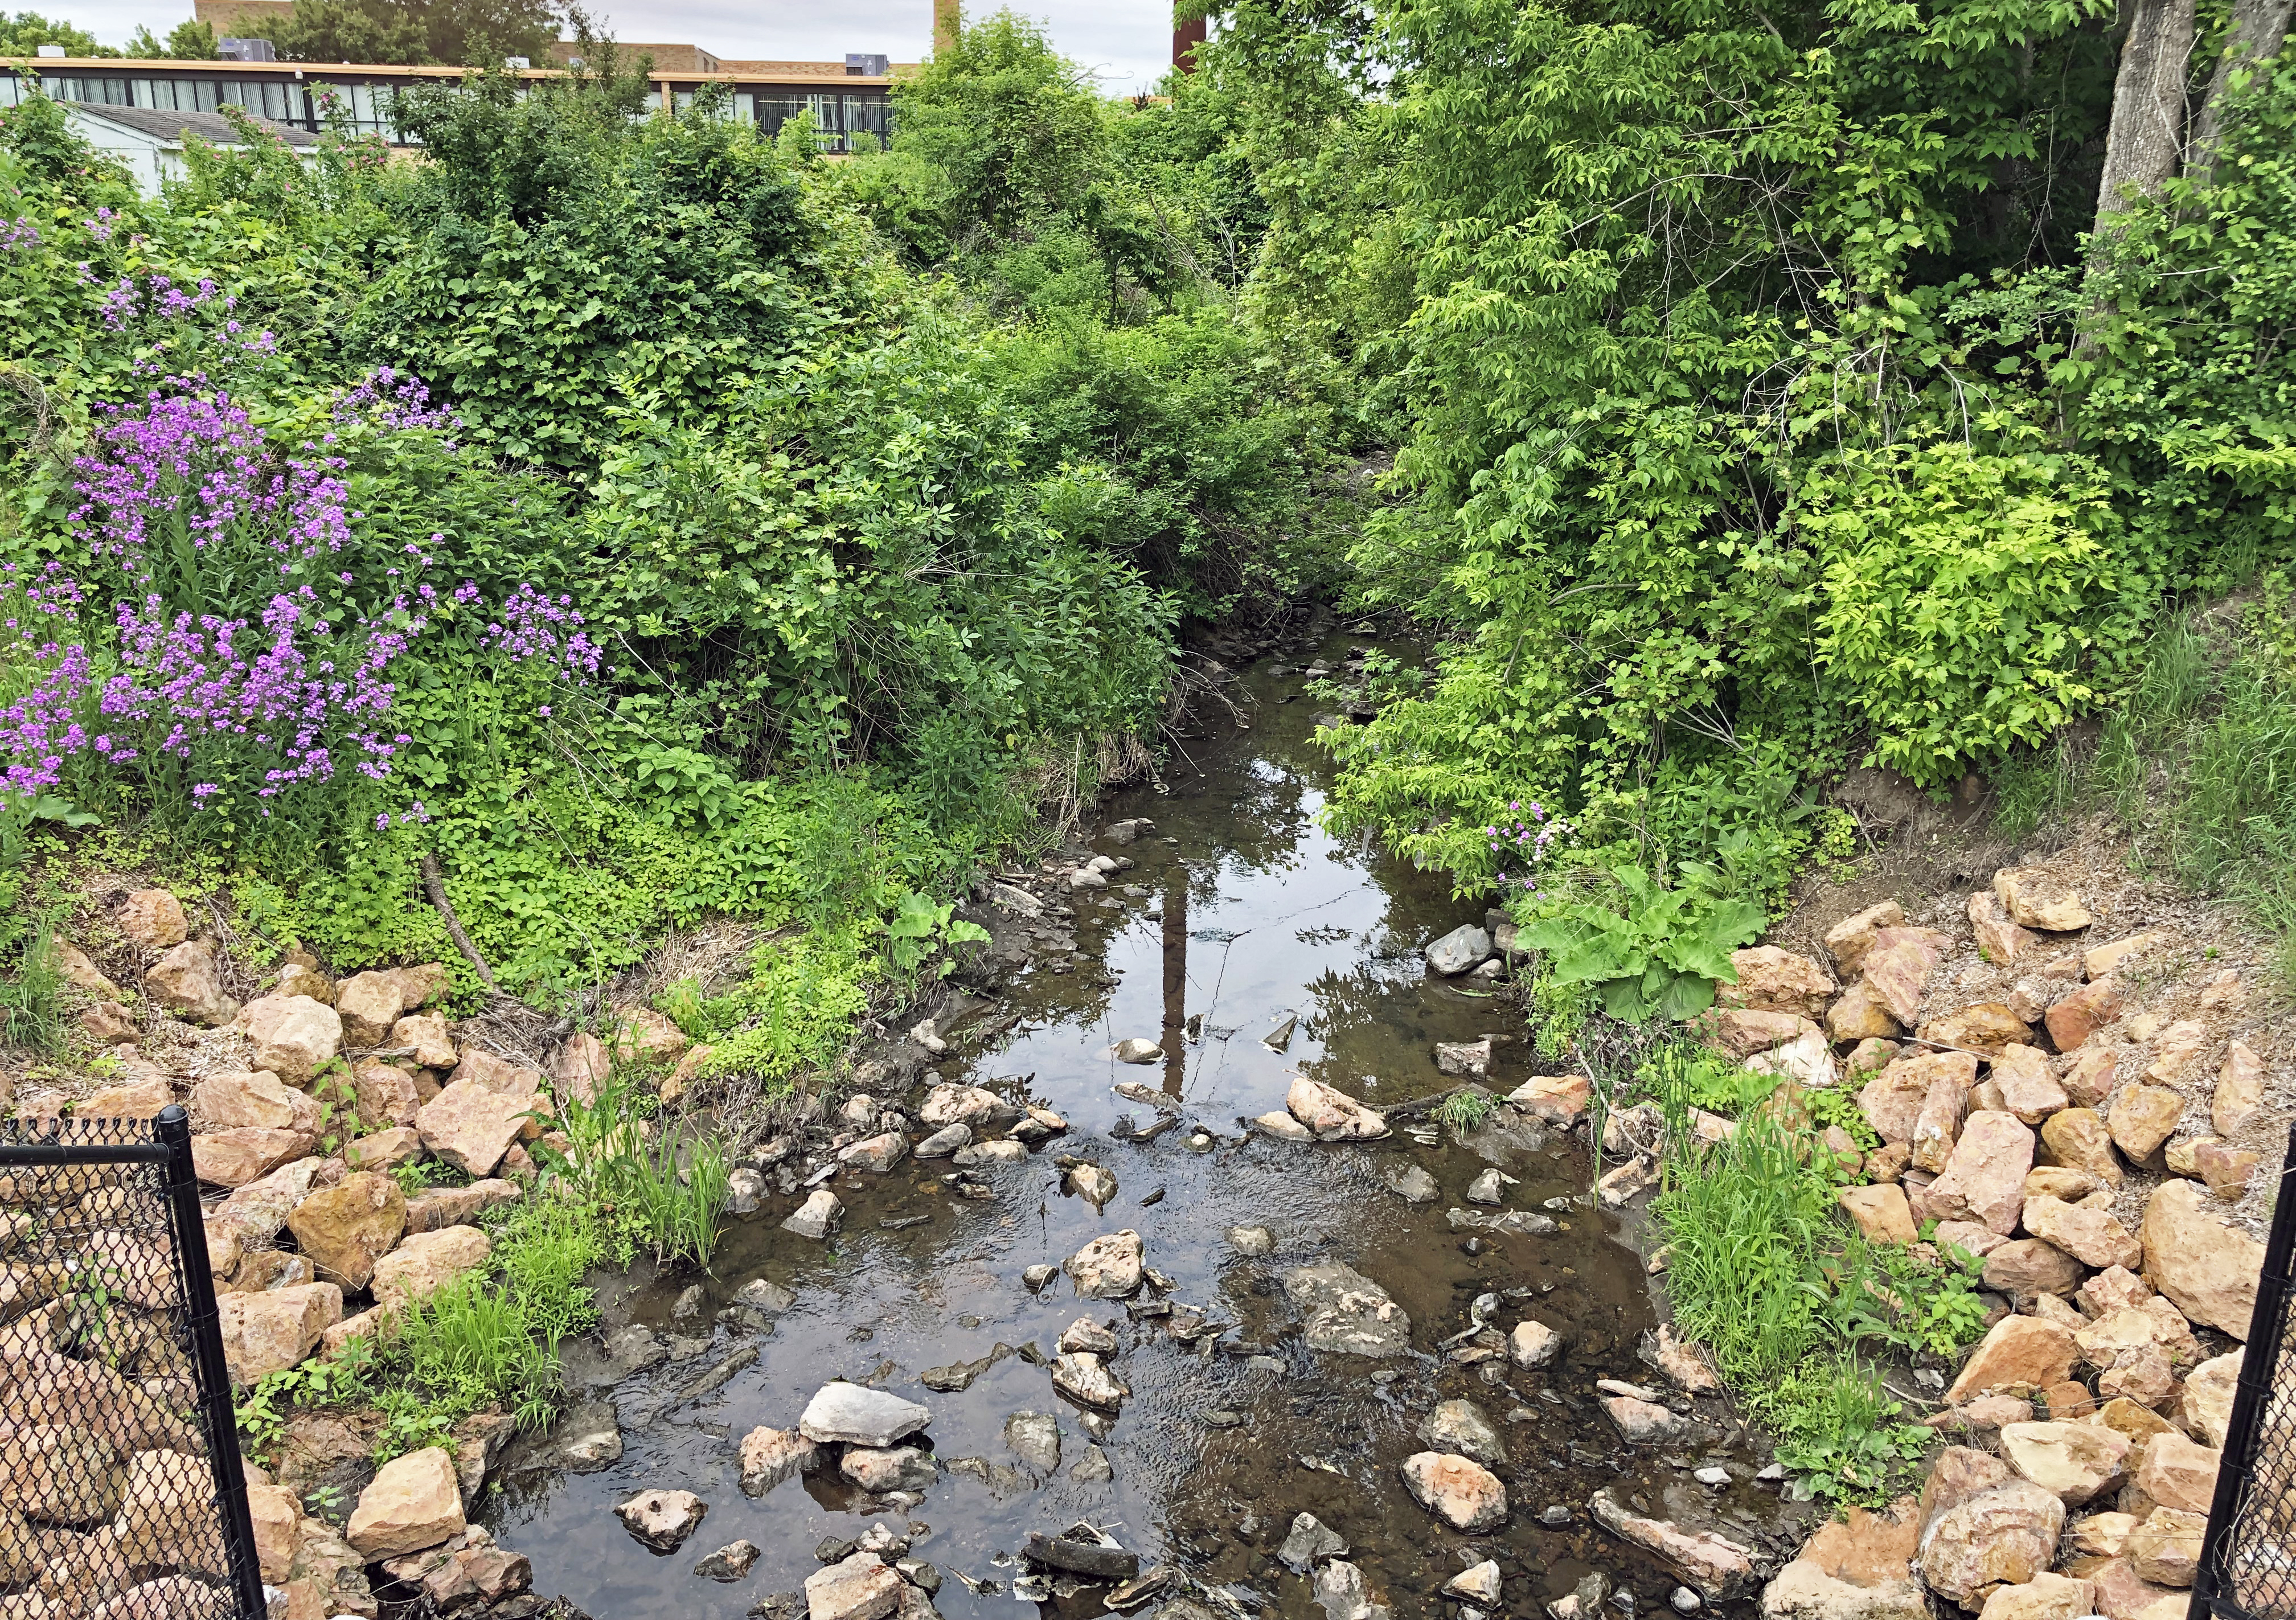 A view of the restored East Chaska Creek after construction